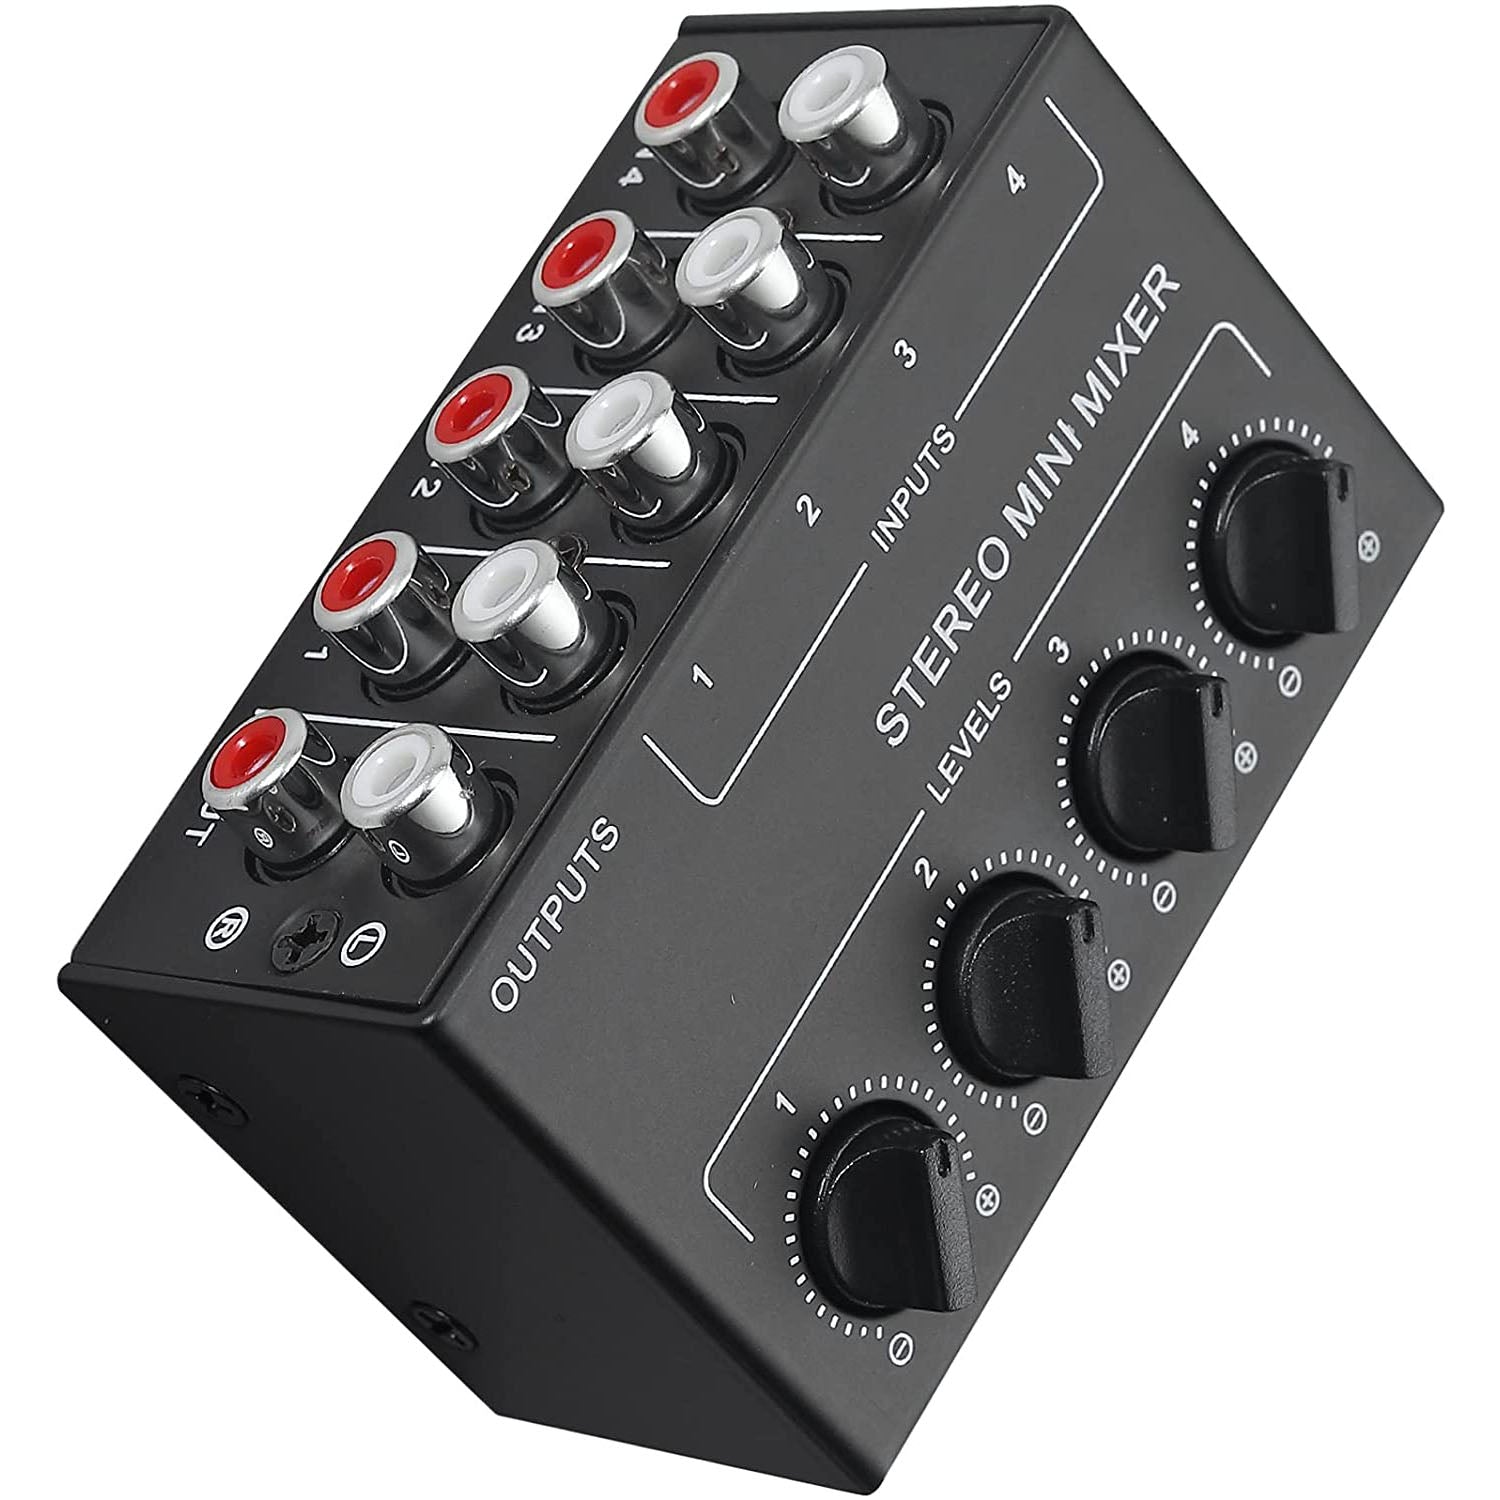 LiNKFOR 4 Channel Stereo Mixer – LiNKFOR Store